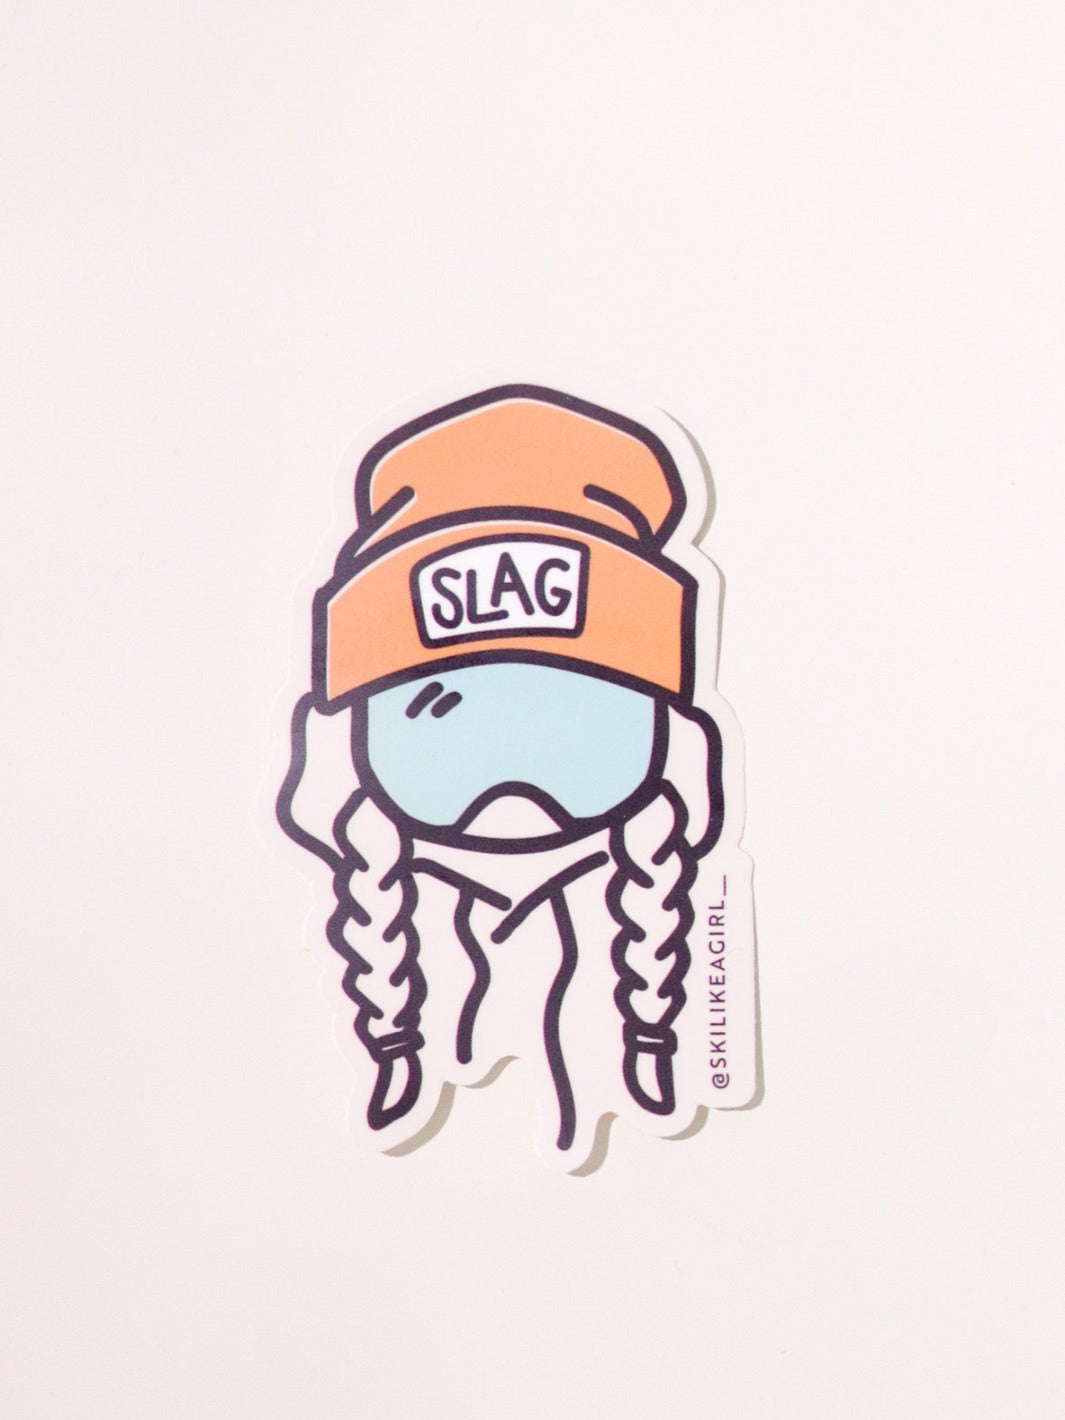 drawing of a girl in a beanie